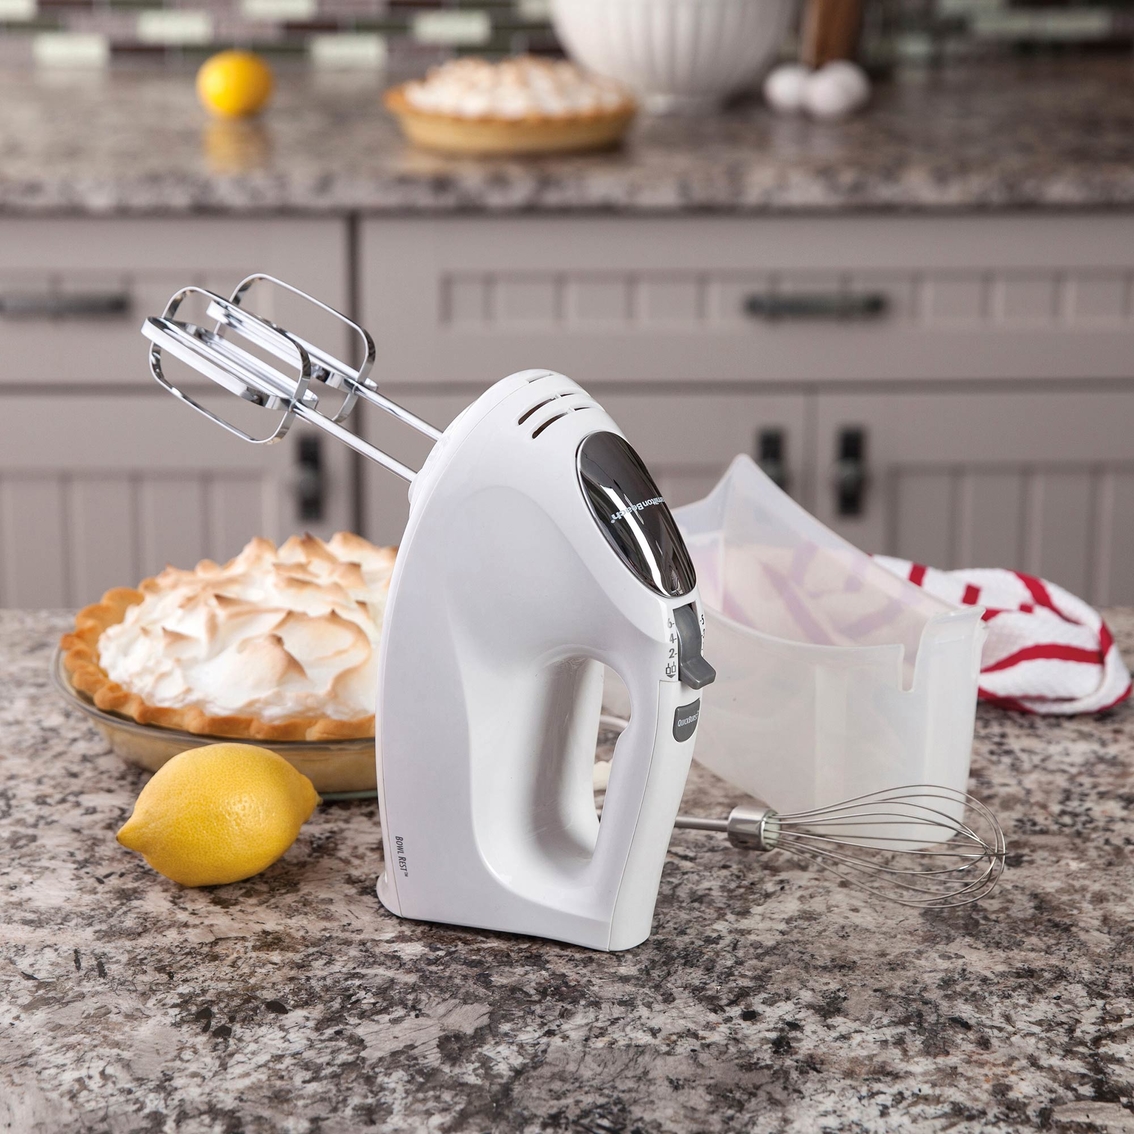 Hamilton Beach Hand Mixer with Snap On Case - Image 4 of 4